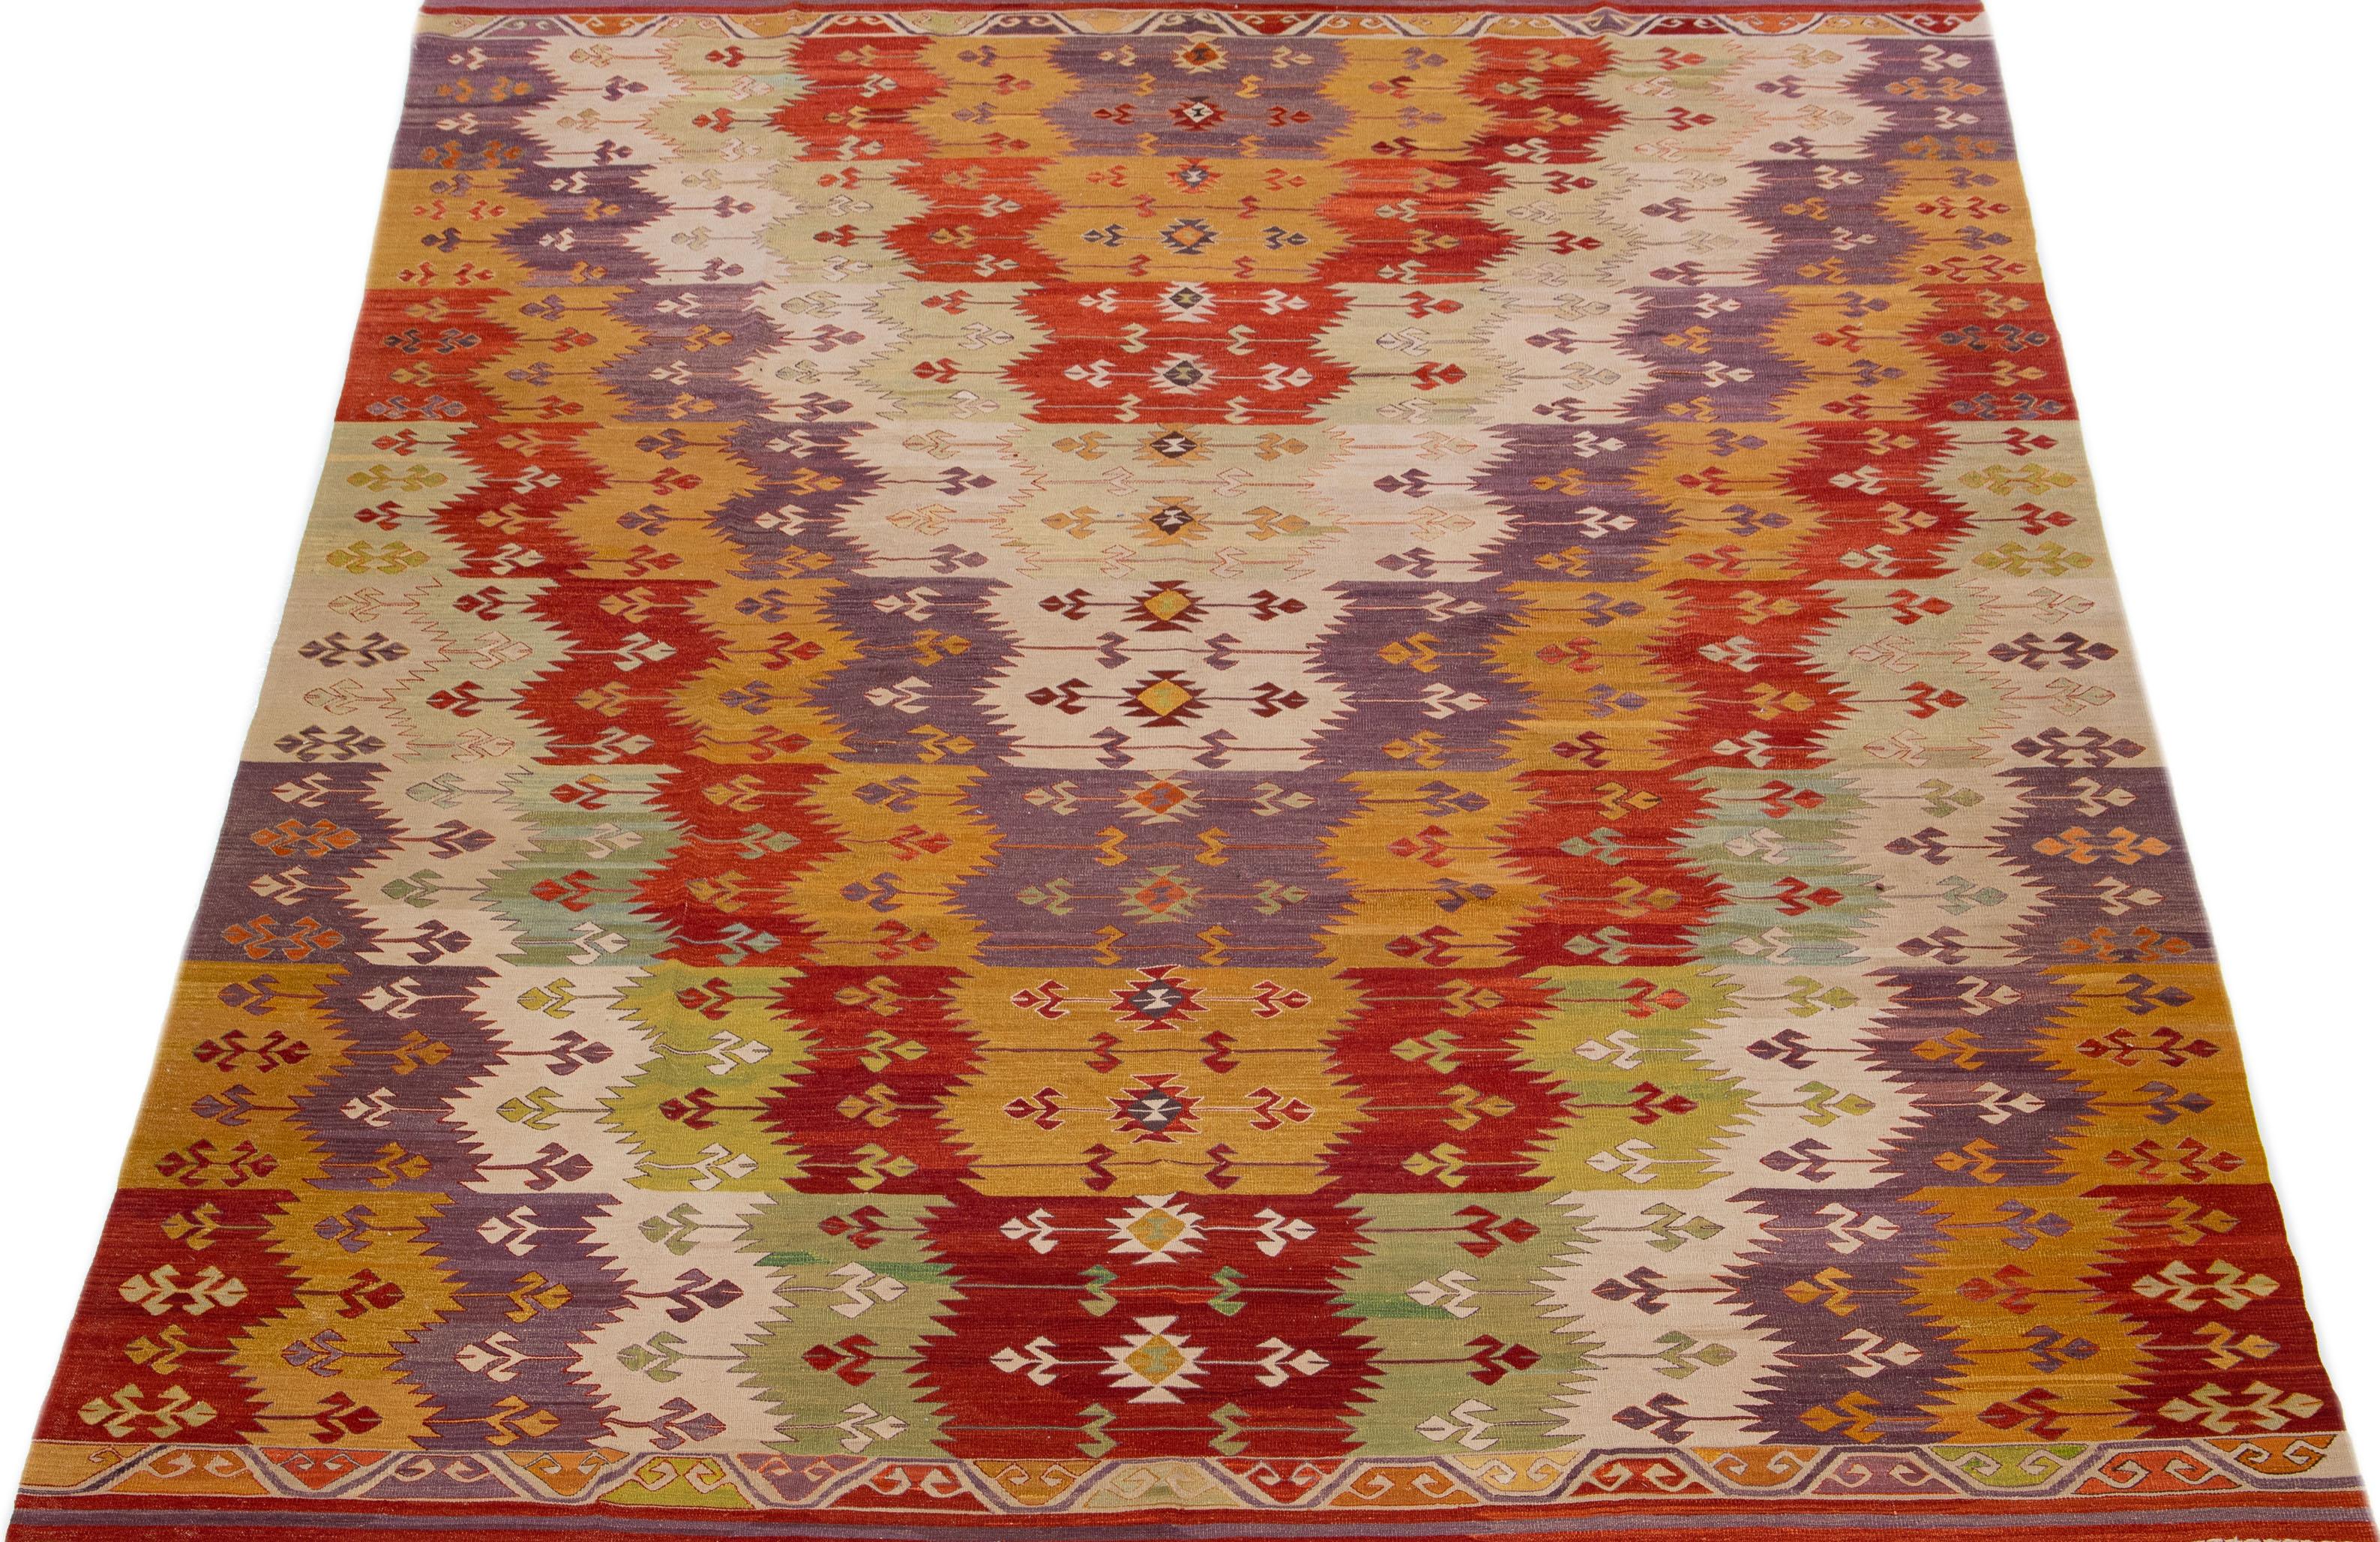 This modern kilim rug of Turkish origin features a vibrant and intricate all-over geometric pattern that combines red, green, purple, and orange colors, rendering it a timeless addition to 21st-century interior design.

This rug measures 10'2